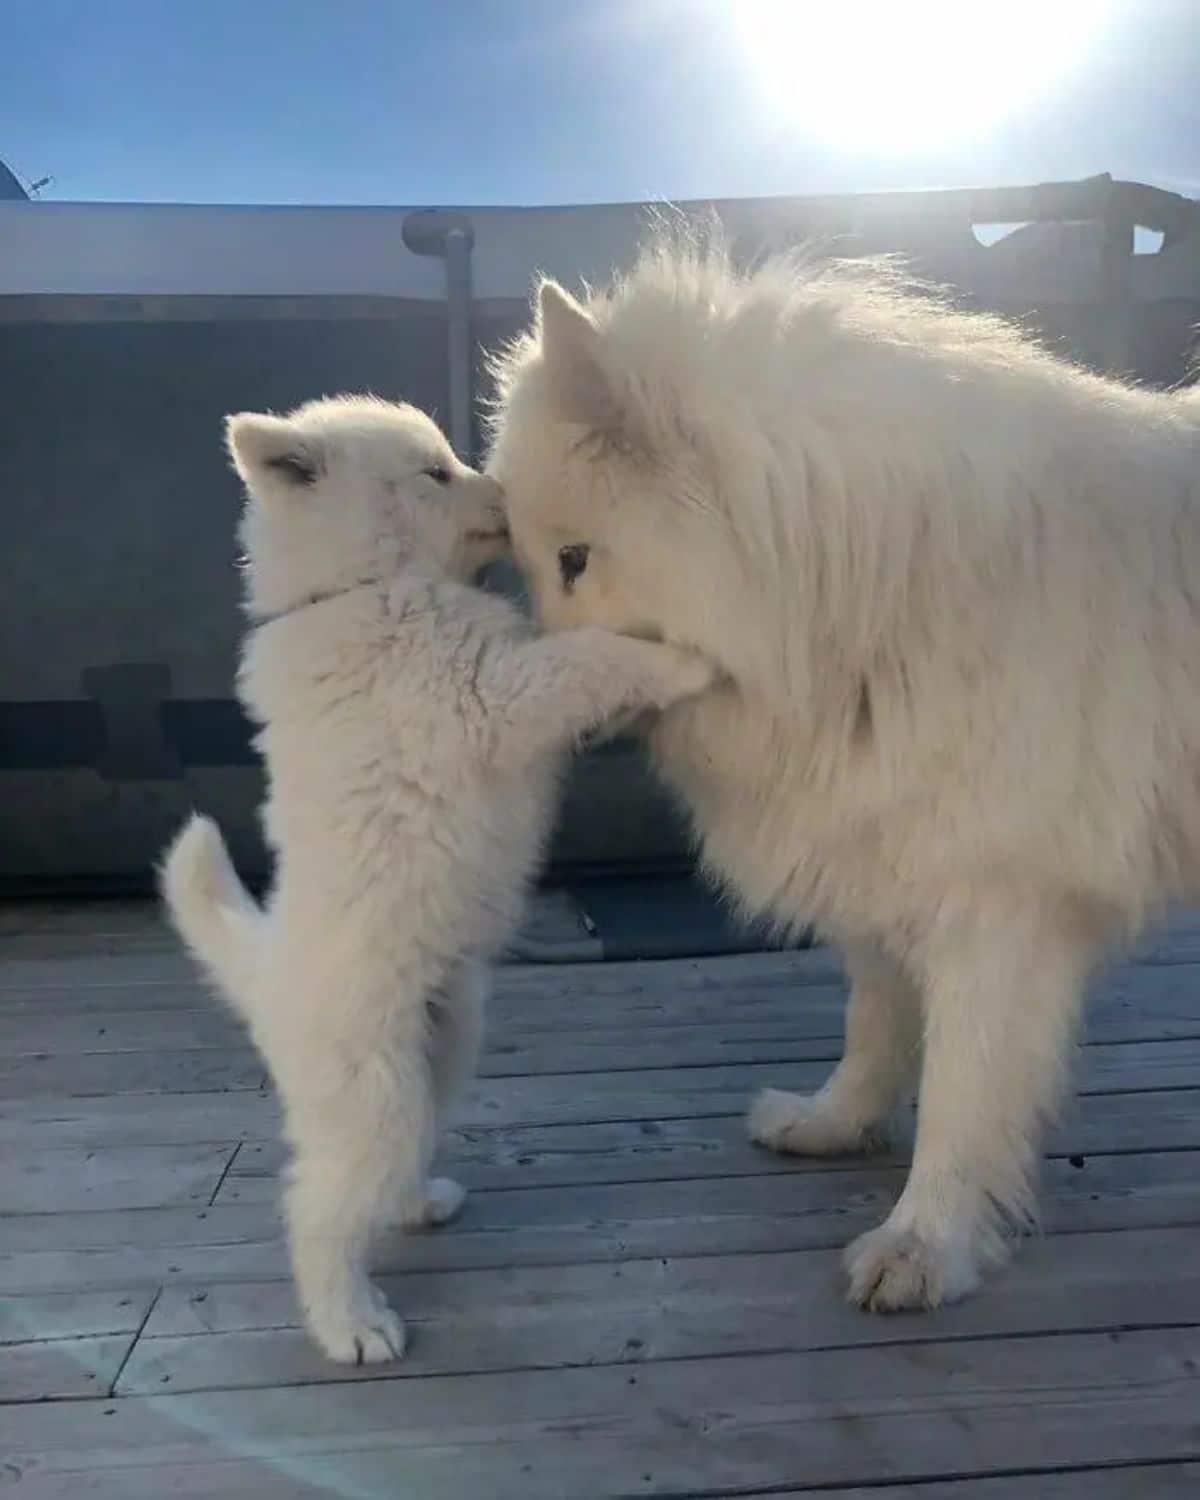 fluffy white puppy on hind legs with its front paws and nose on an adult fluffy white dog